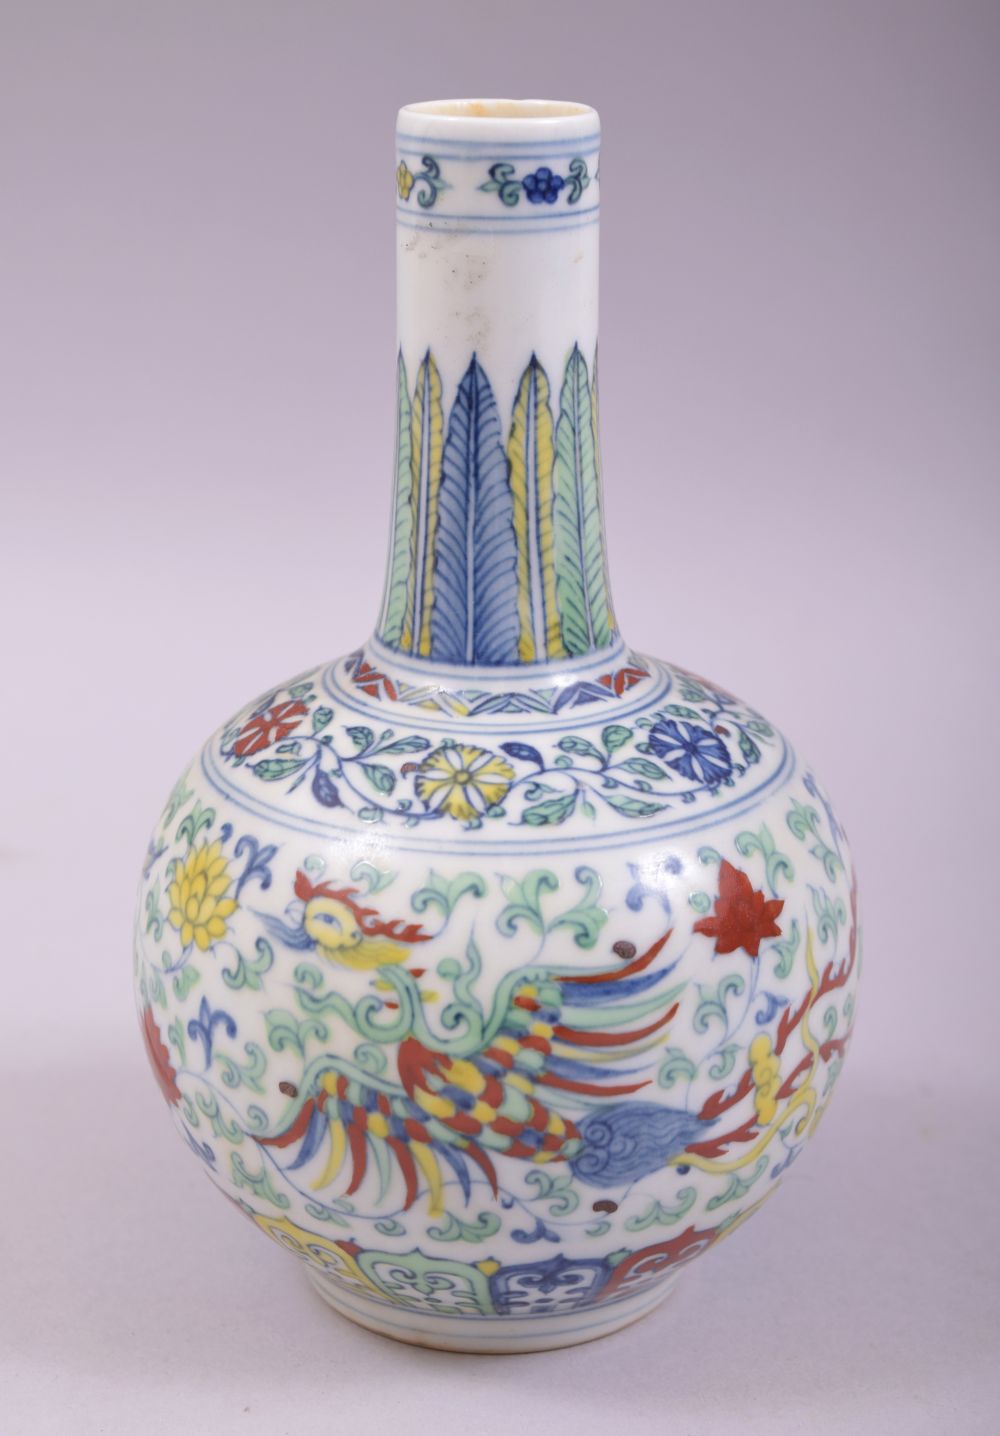 A SMALL CHINESE DOUCAI PORCELAIN BOTTLE VASE, painted in the doucai palette with a dragon and